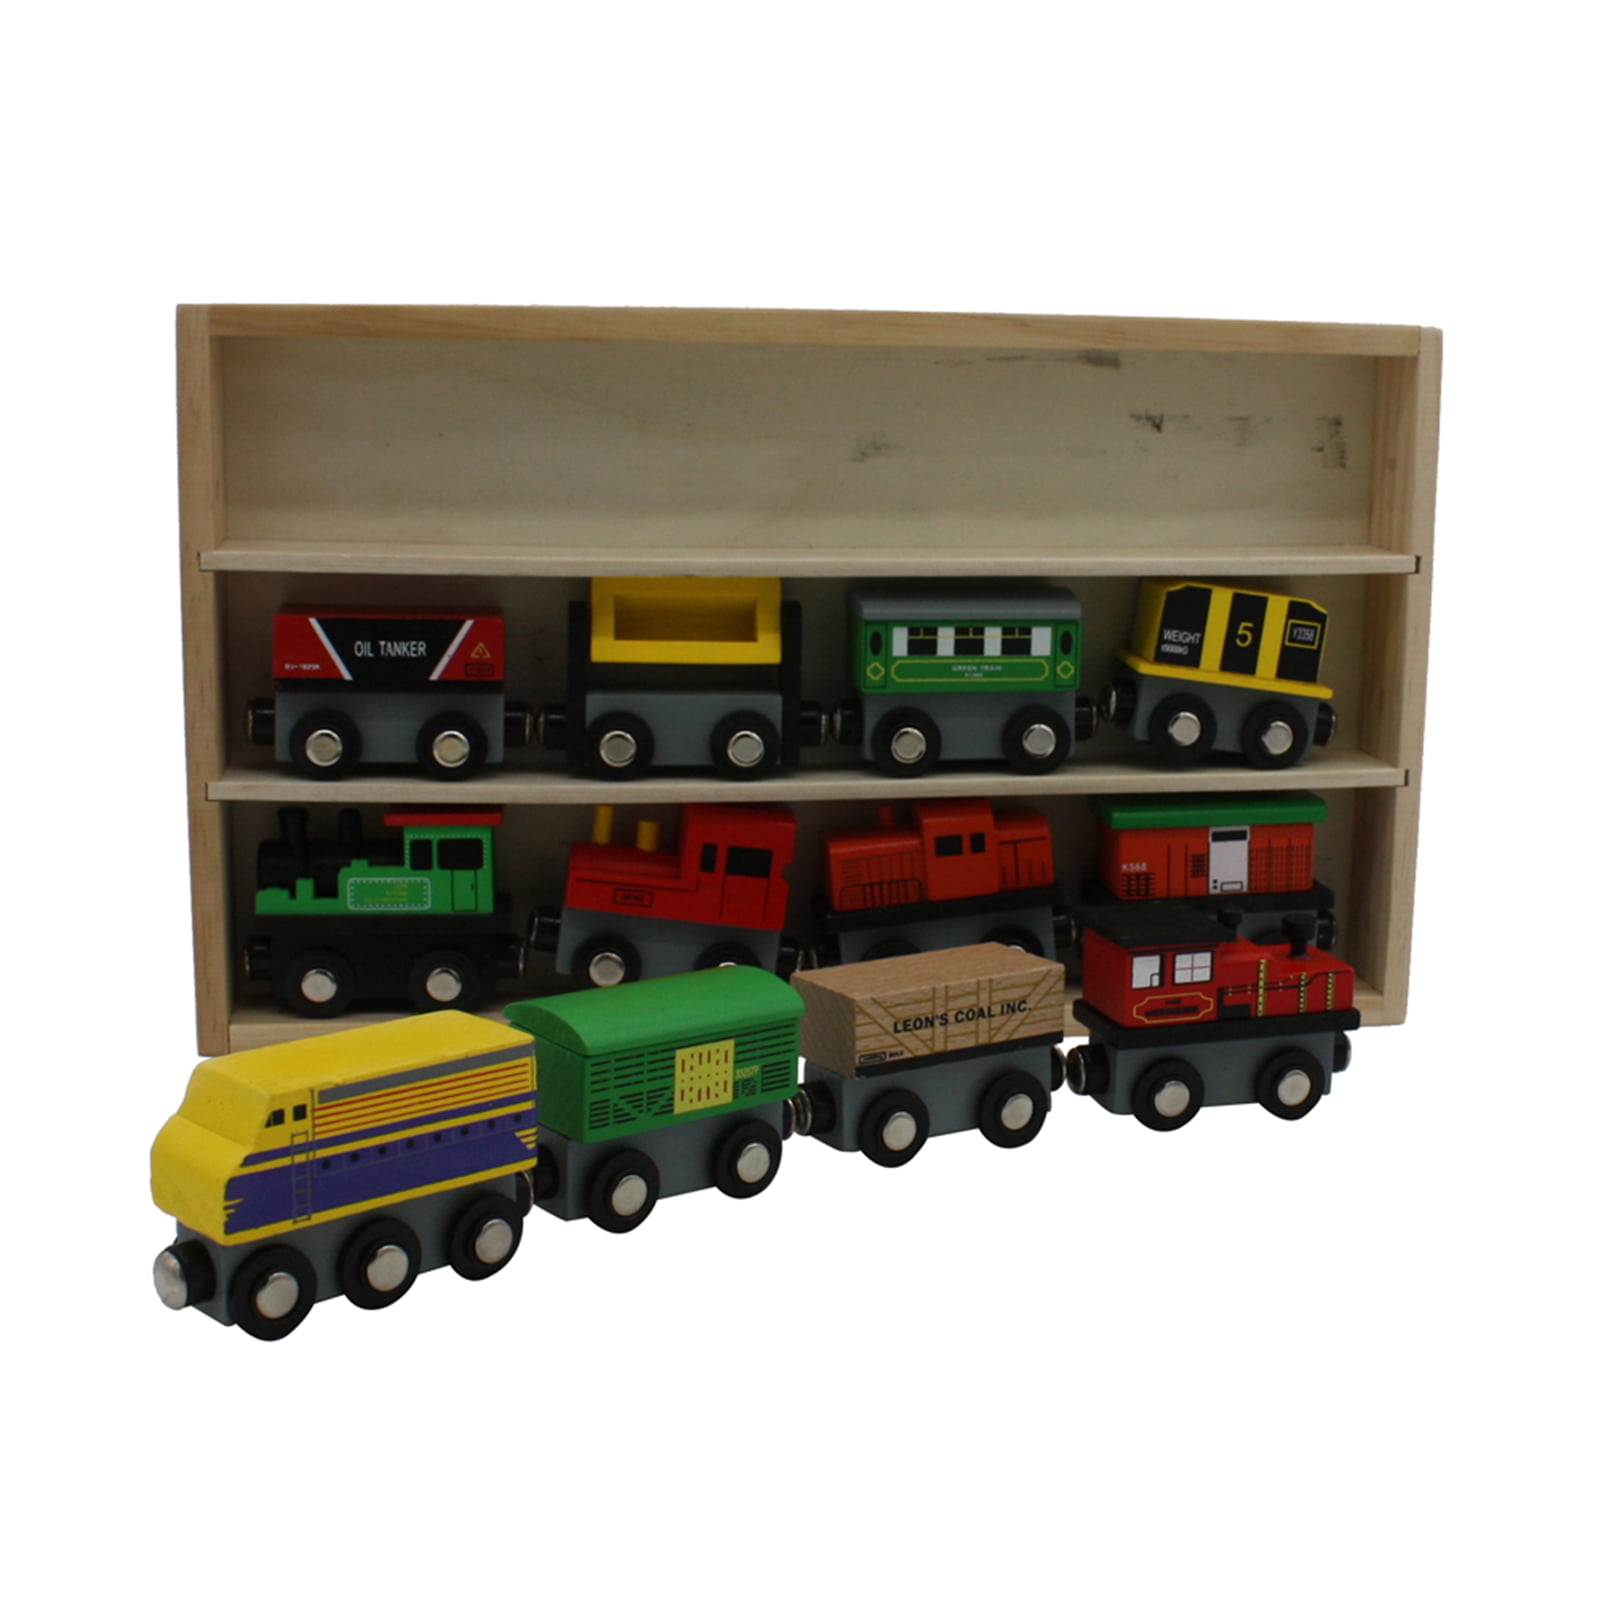 The Polaris Express Train Building Kit FAST SHIPPING HIGH QUALITY 